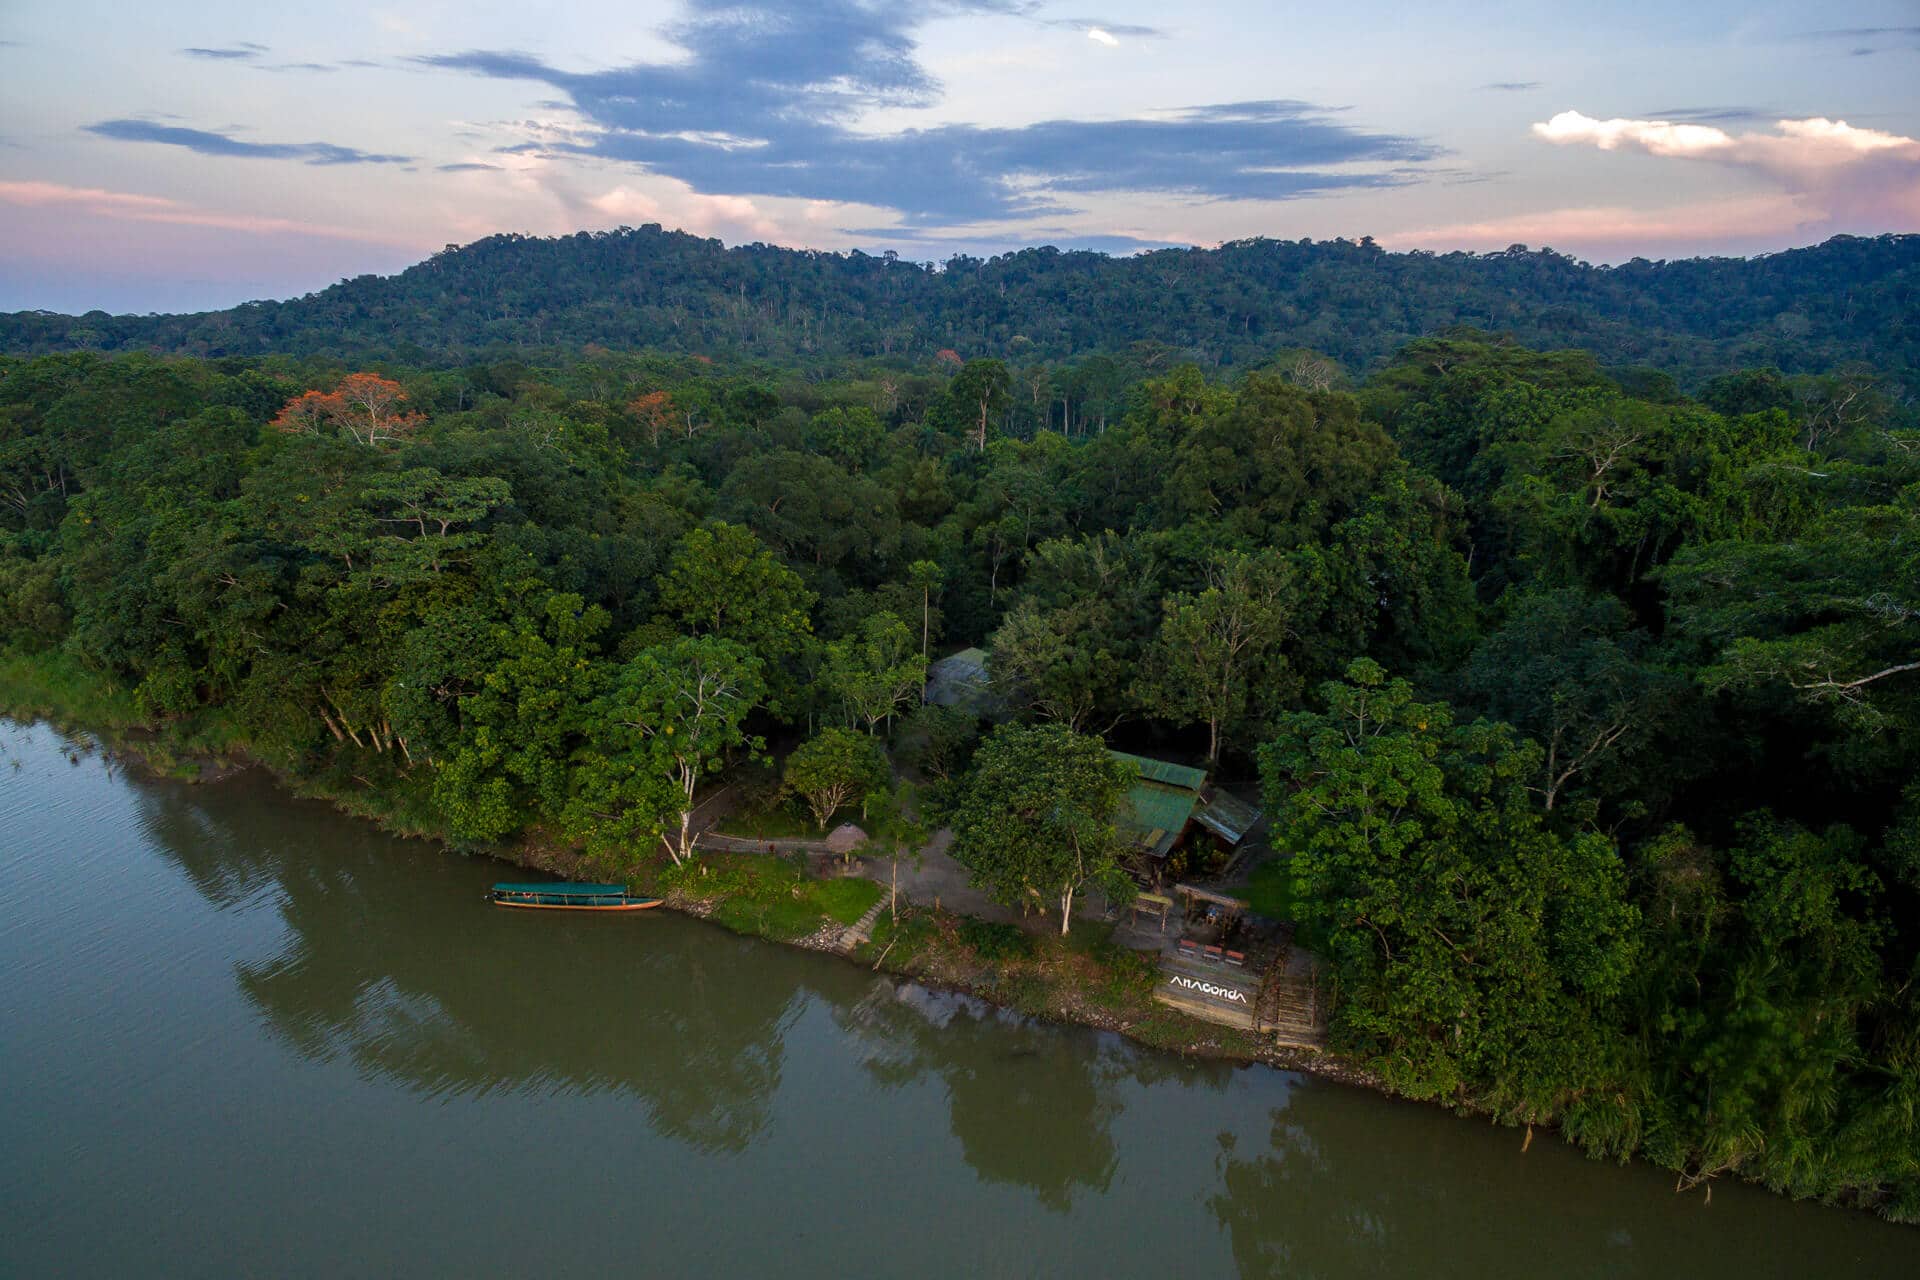 How to arrive to the Amazon rainforest in Ecuador